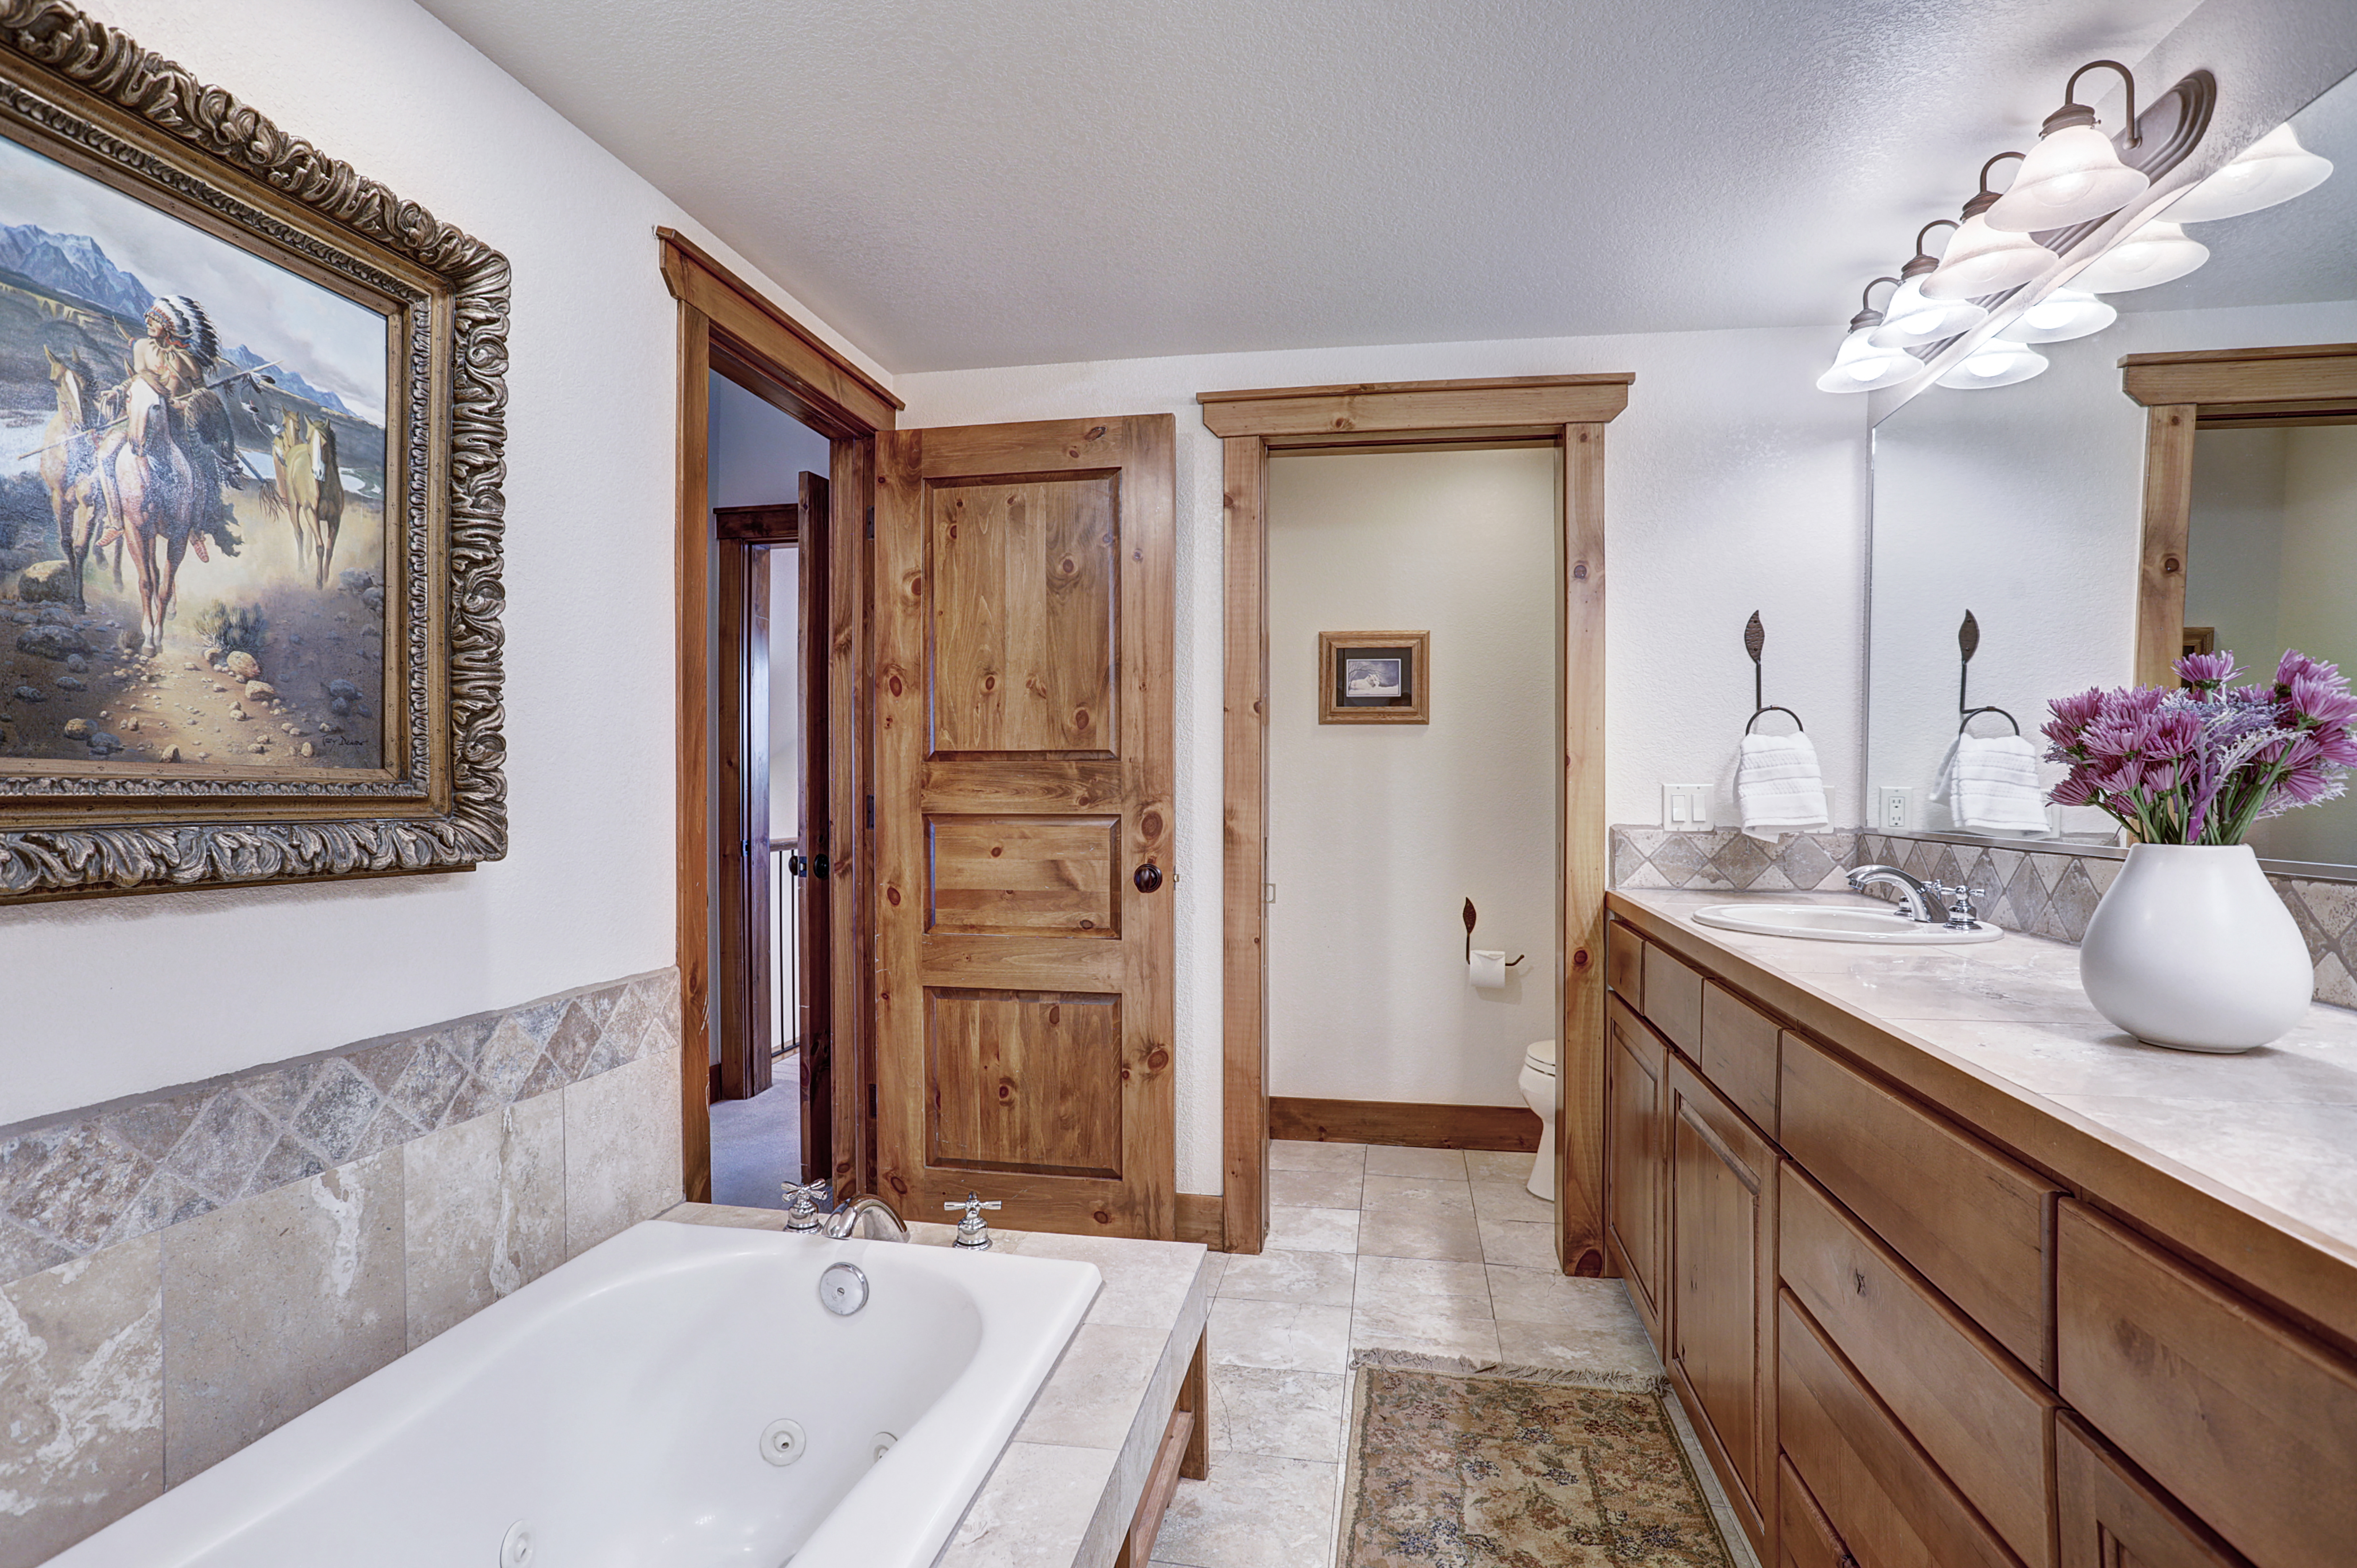 The master bathroom offers a large bathtub, walk in shower and double vanity sinks - Amber Sky Breckenridge Vacation Rental